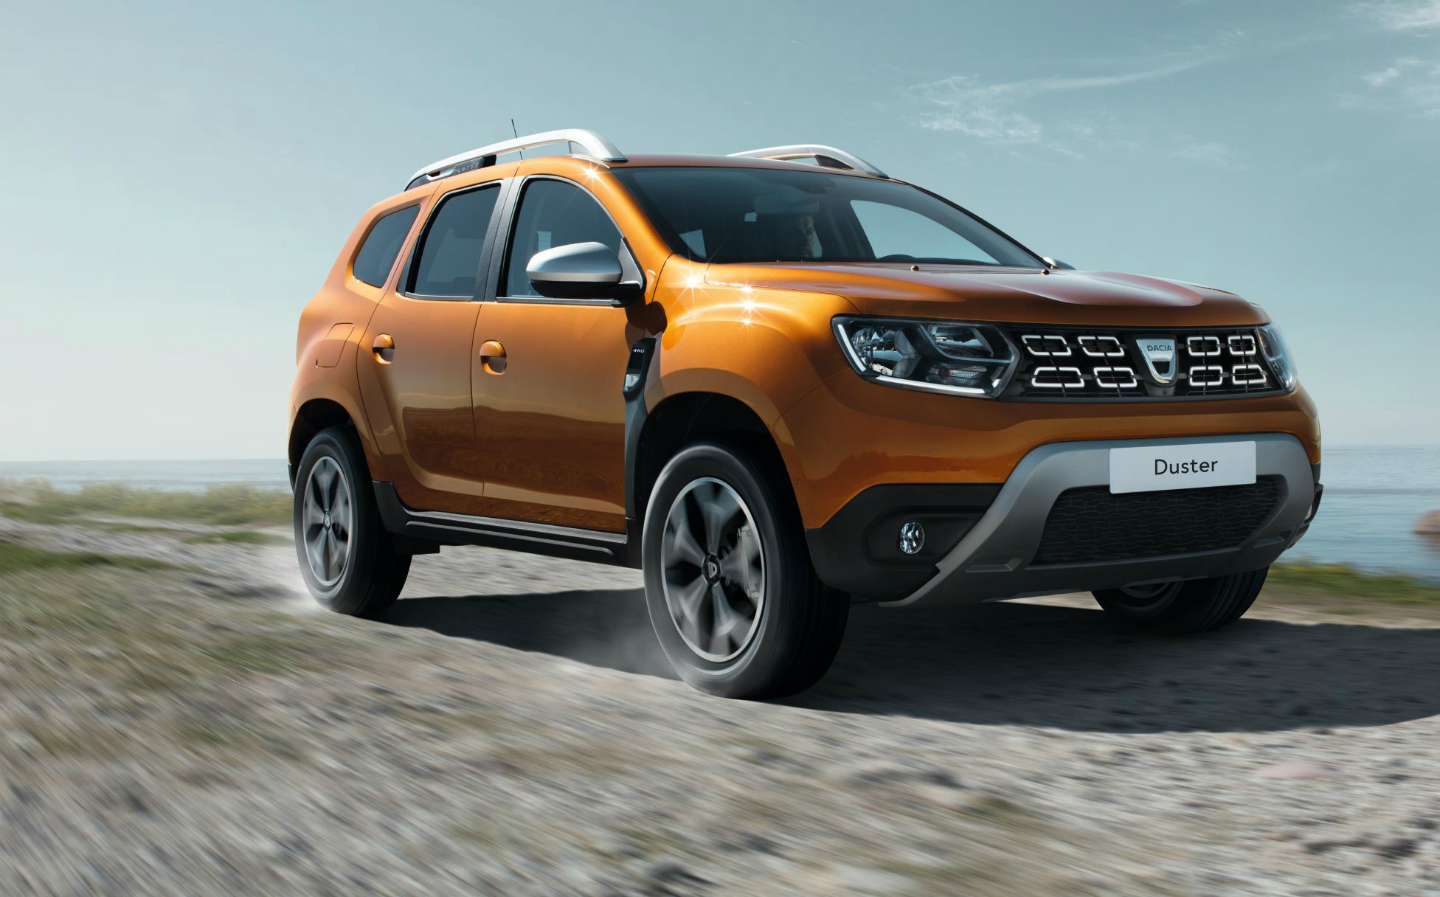 The new Dacia Duster will go on sale in the UK in the summer of 2018